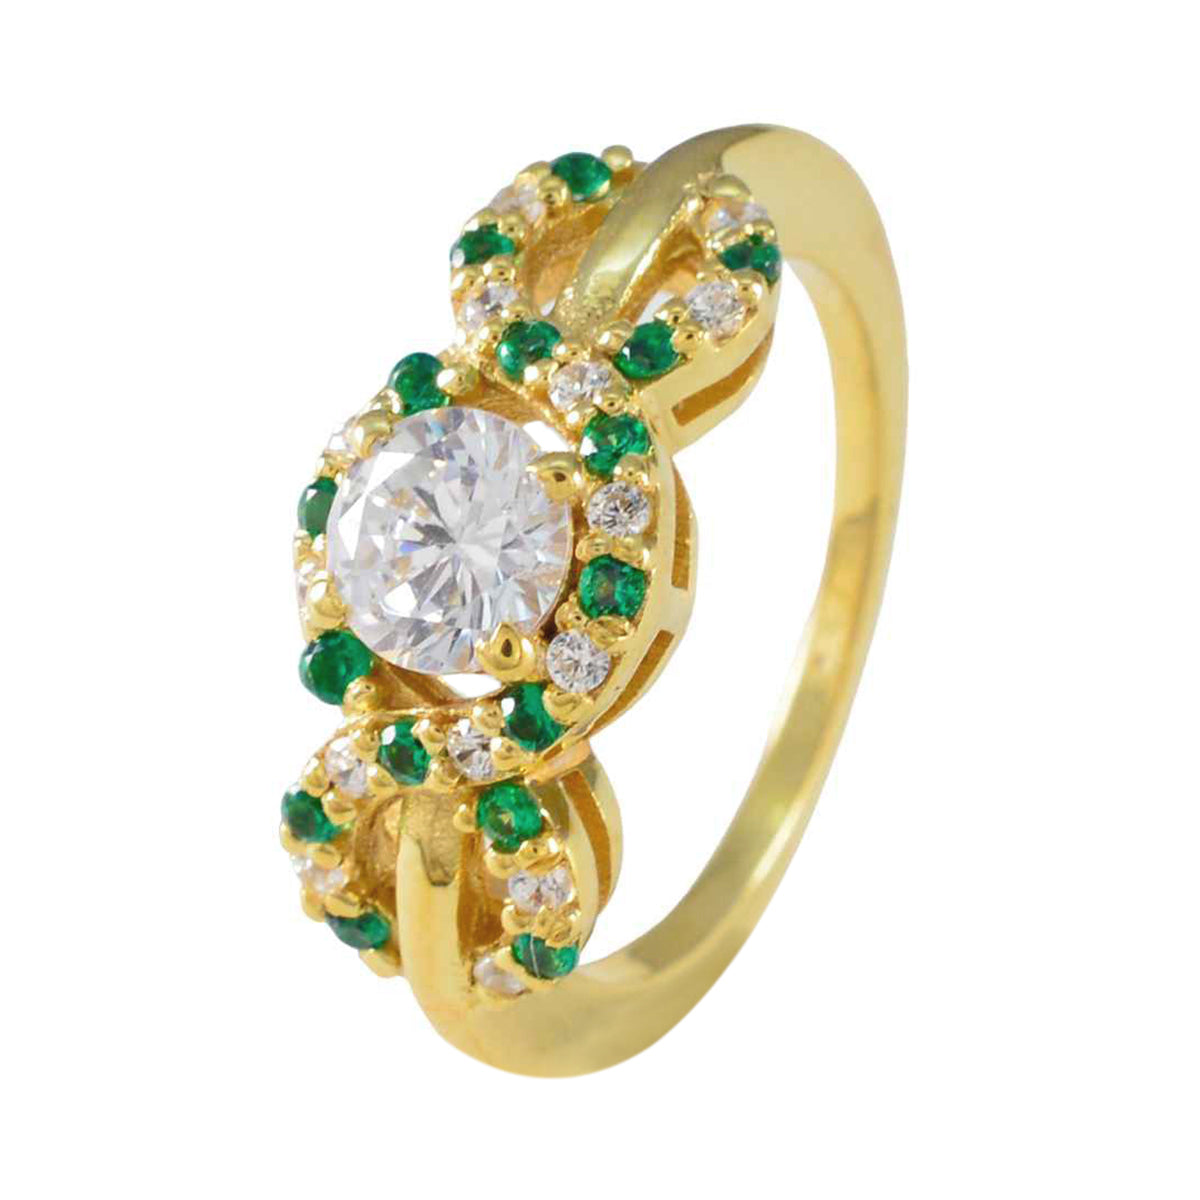 Riyo Indian Silver Ring With Yellow Gold Plating Emerald CZ Stone Round Shape Prong Setting  Jewelry Fathers Day Ring